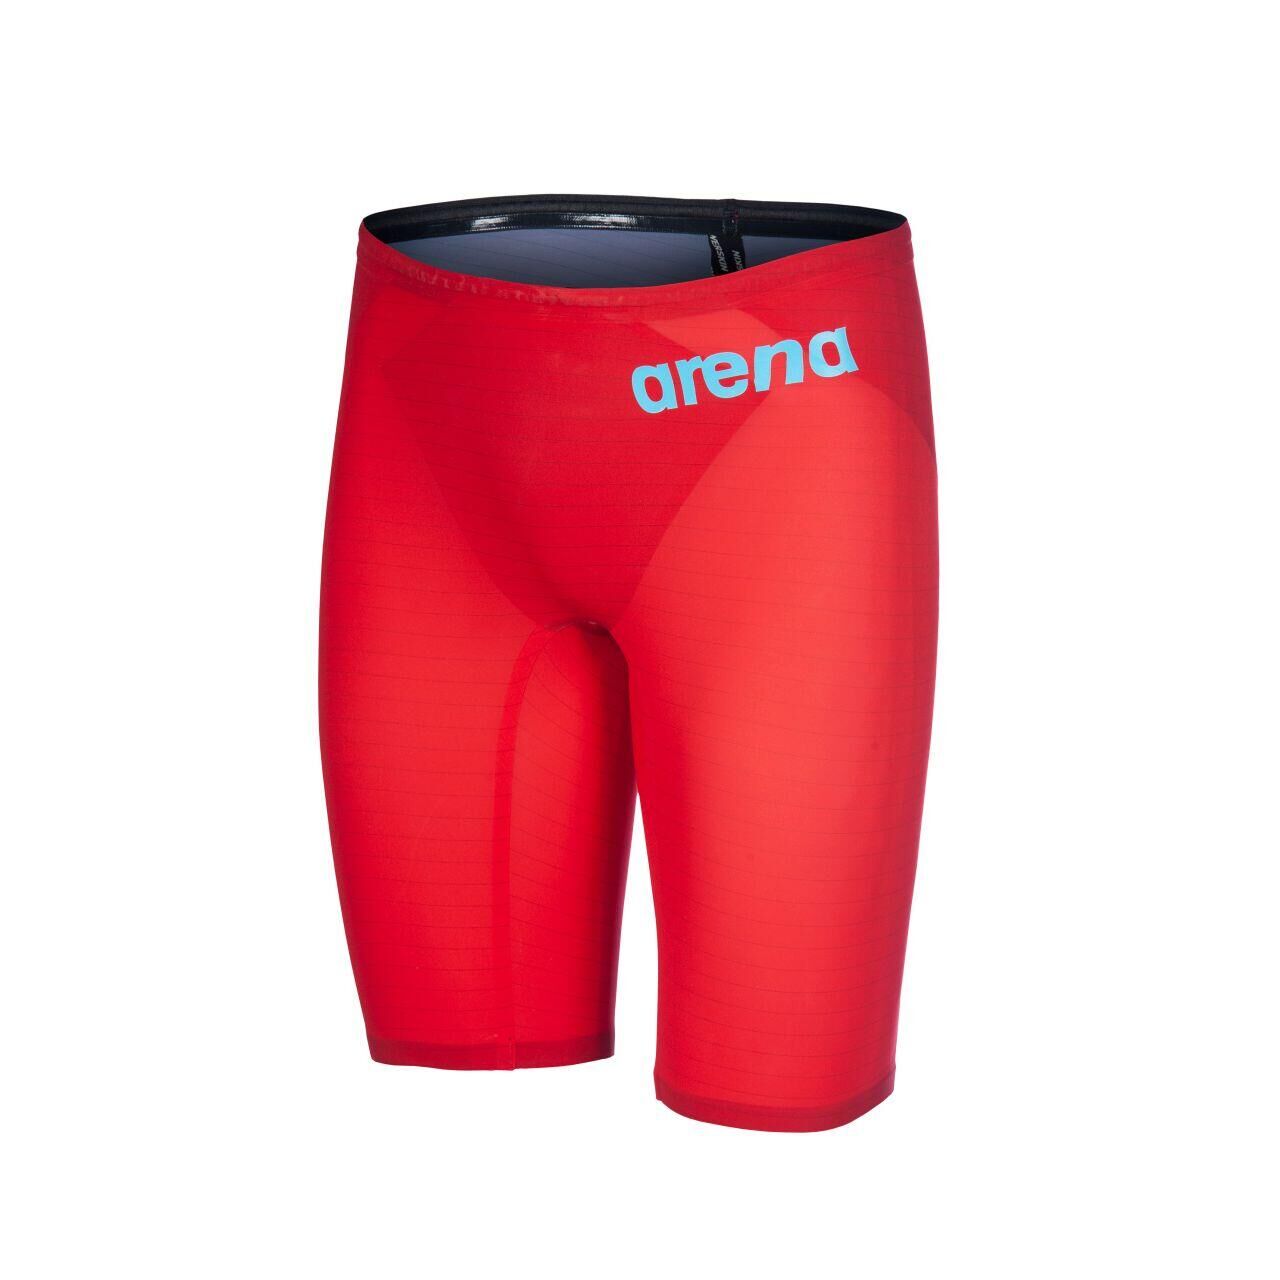 ARENA Arena Powerskin Carbon Air² Jammer - Red / Blue